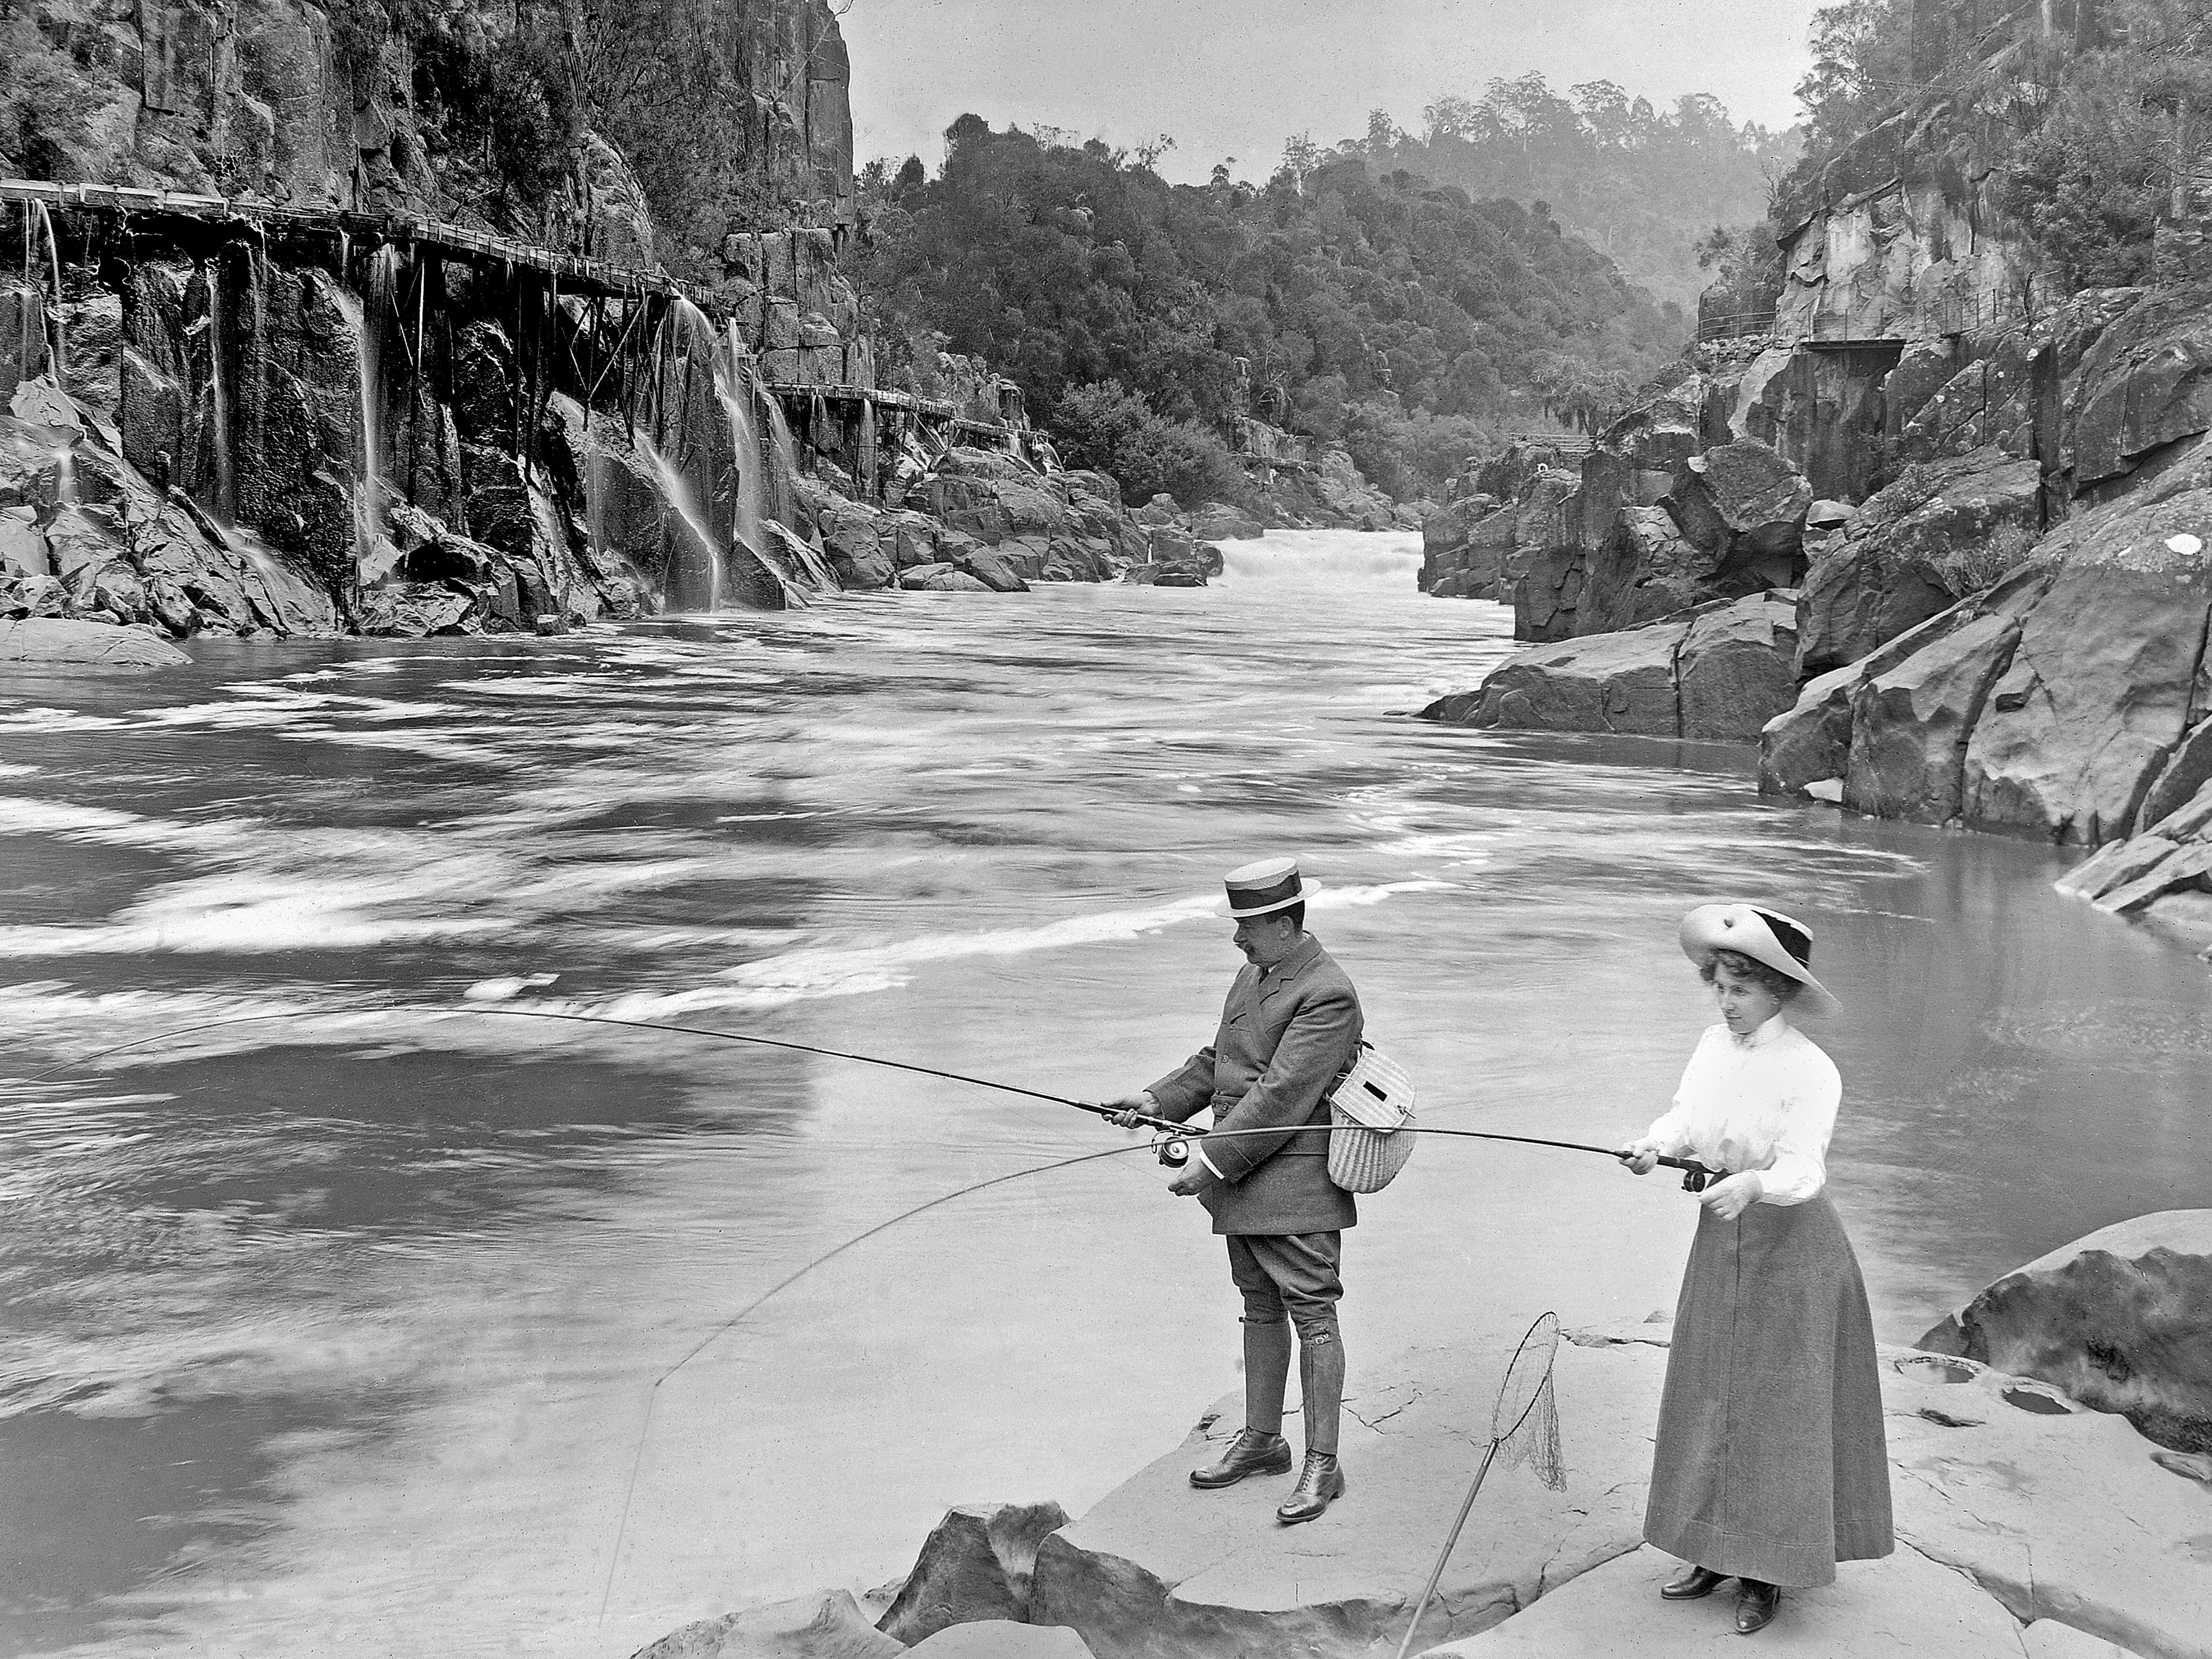 Fishing in the Gorge